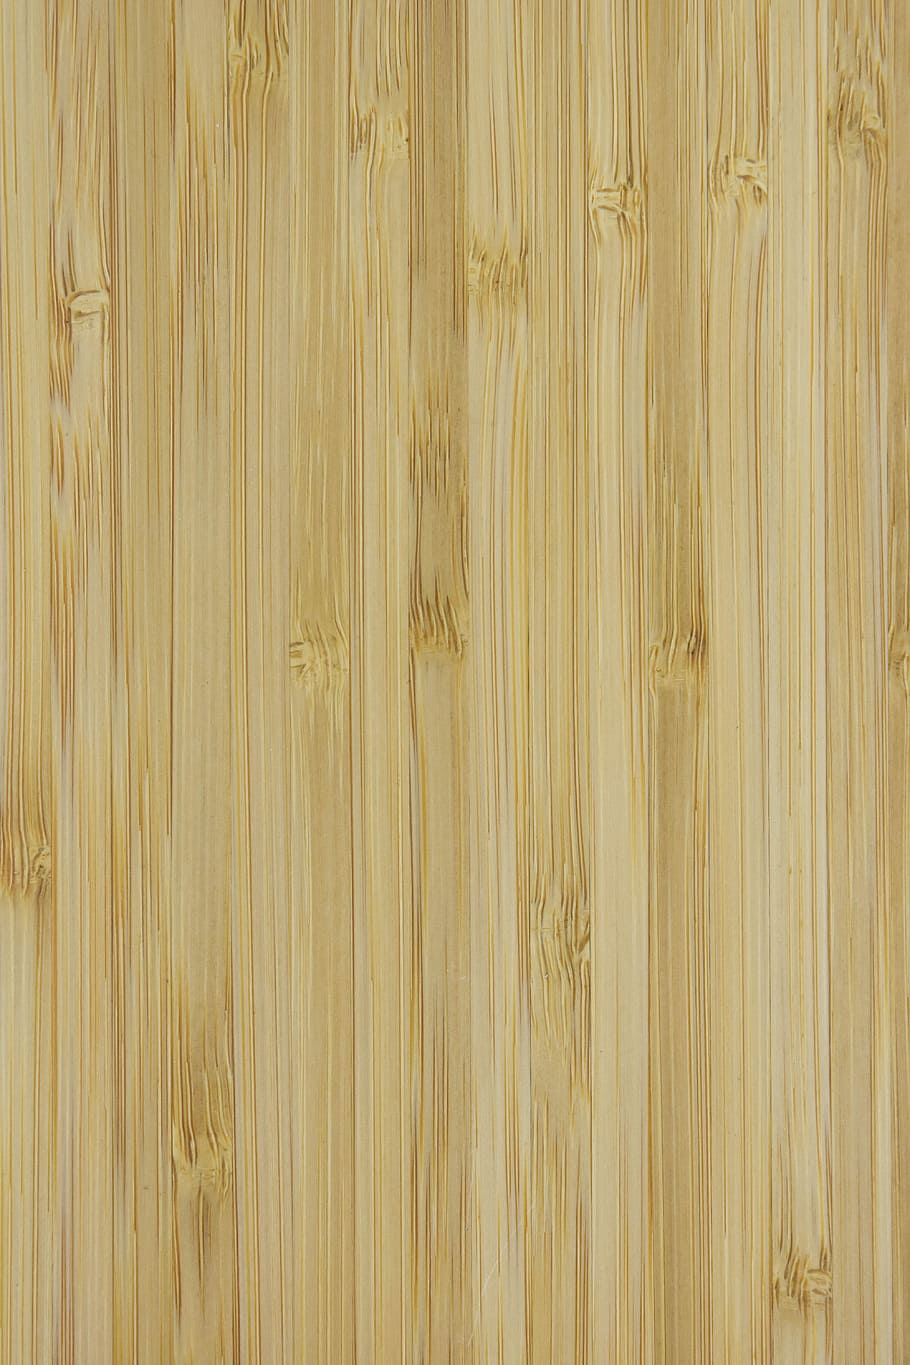 the background, wood, wooden, retro, texture, boards, pattern